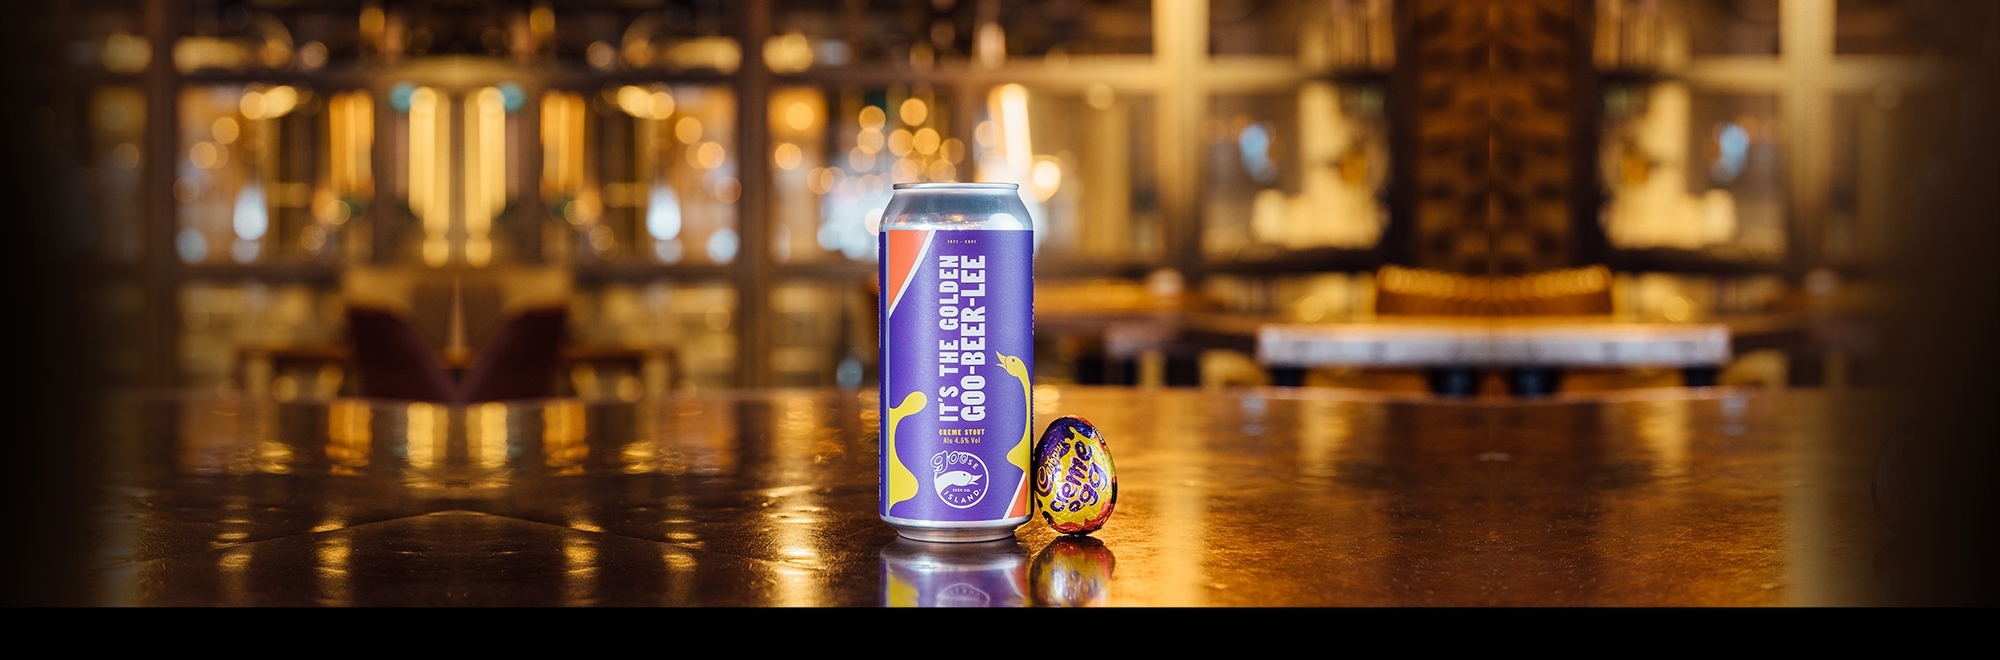 Cadbury Creme Egg teams up with Goose Island to create first ever Creme Egg beer